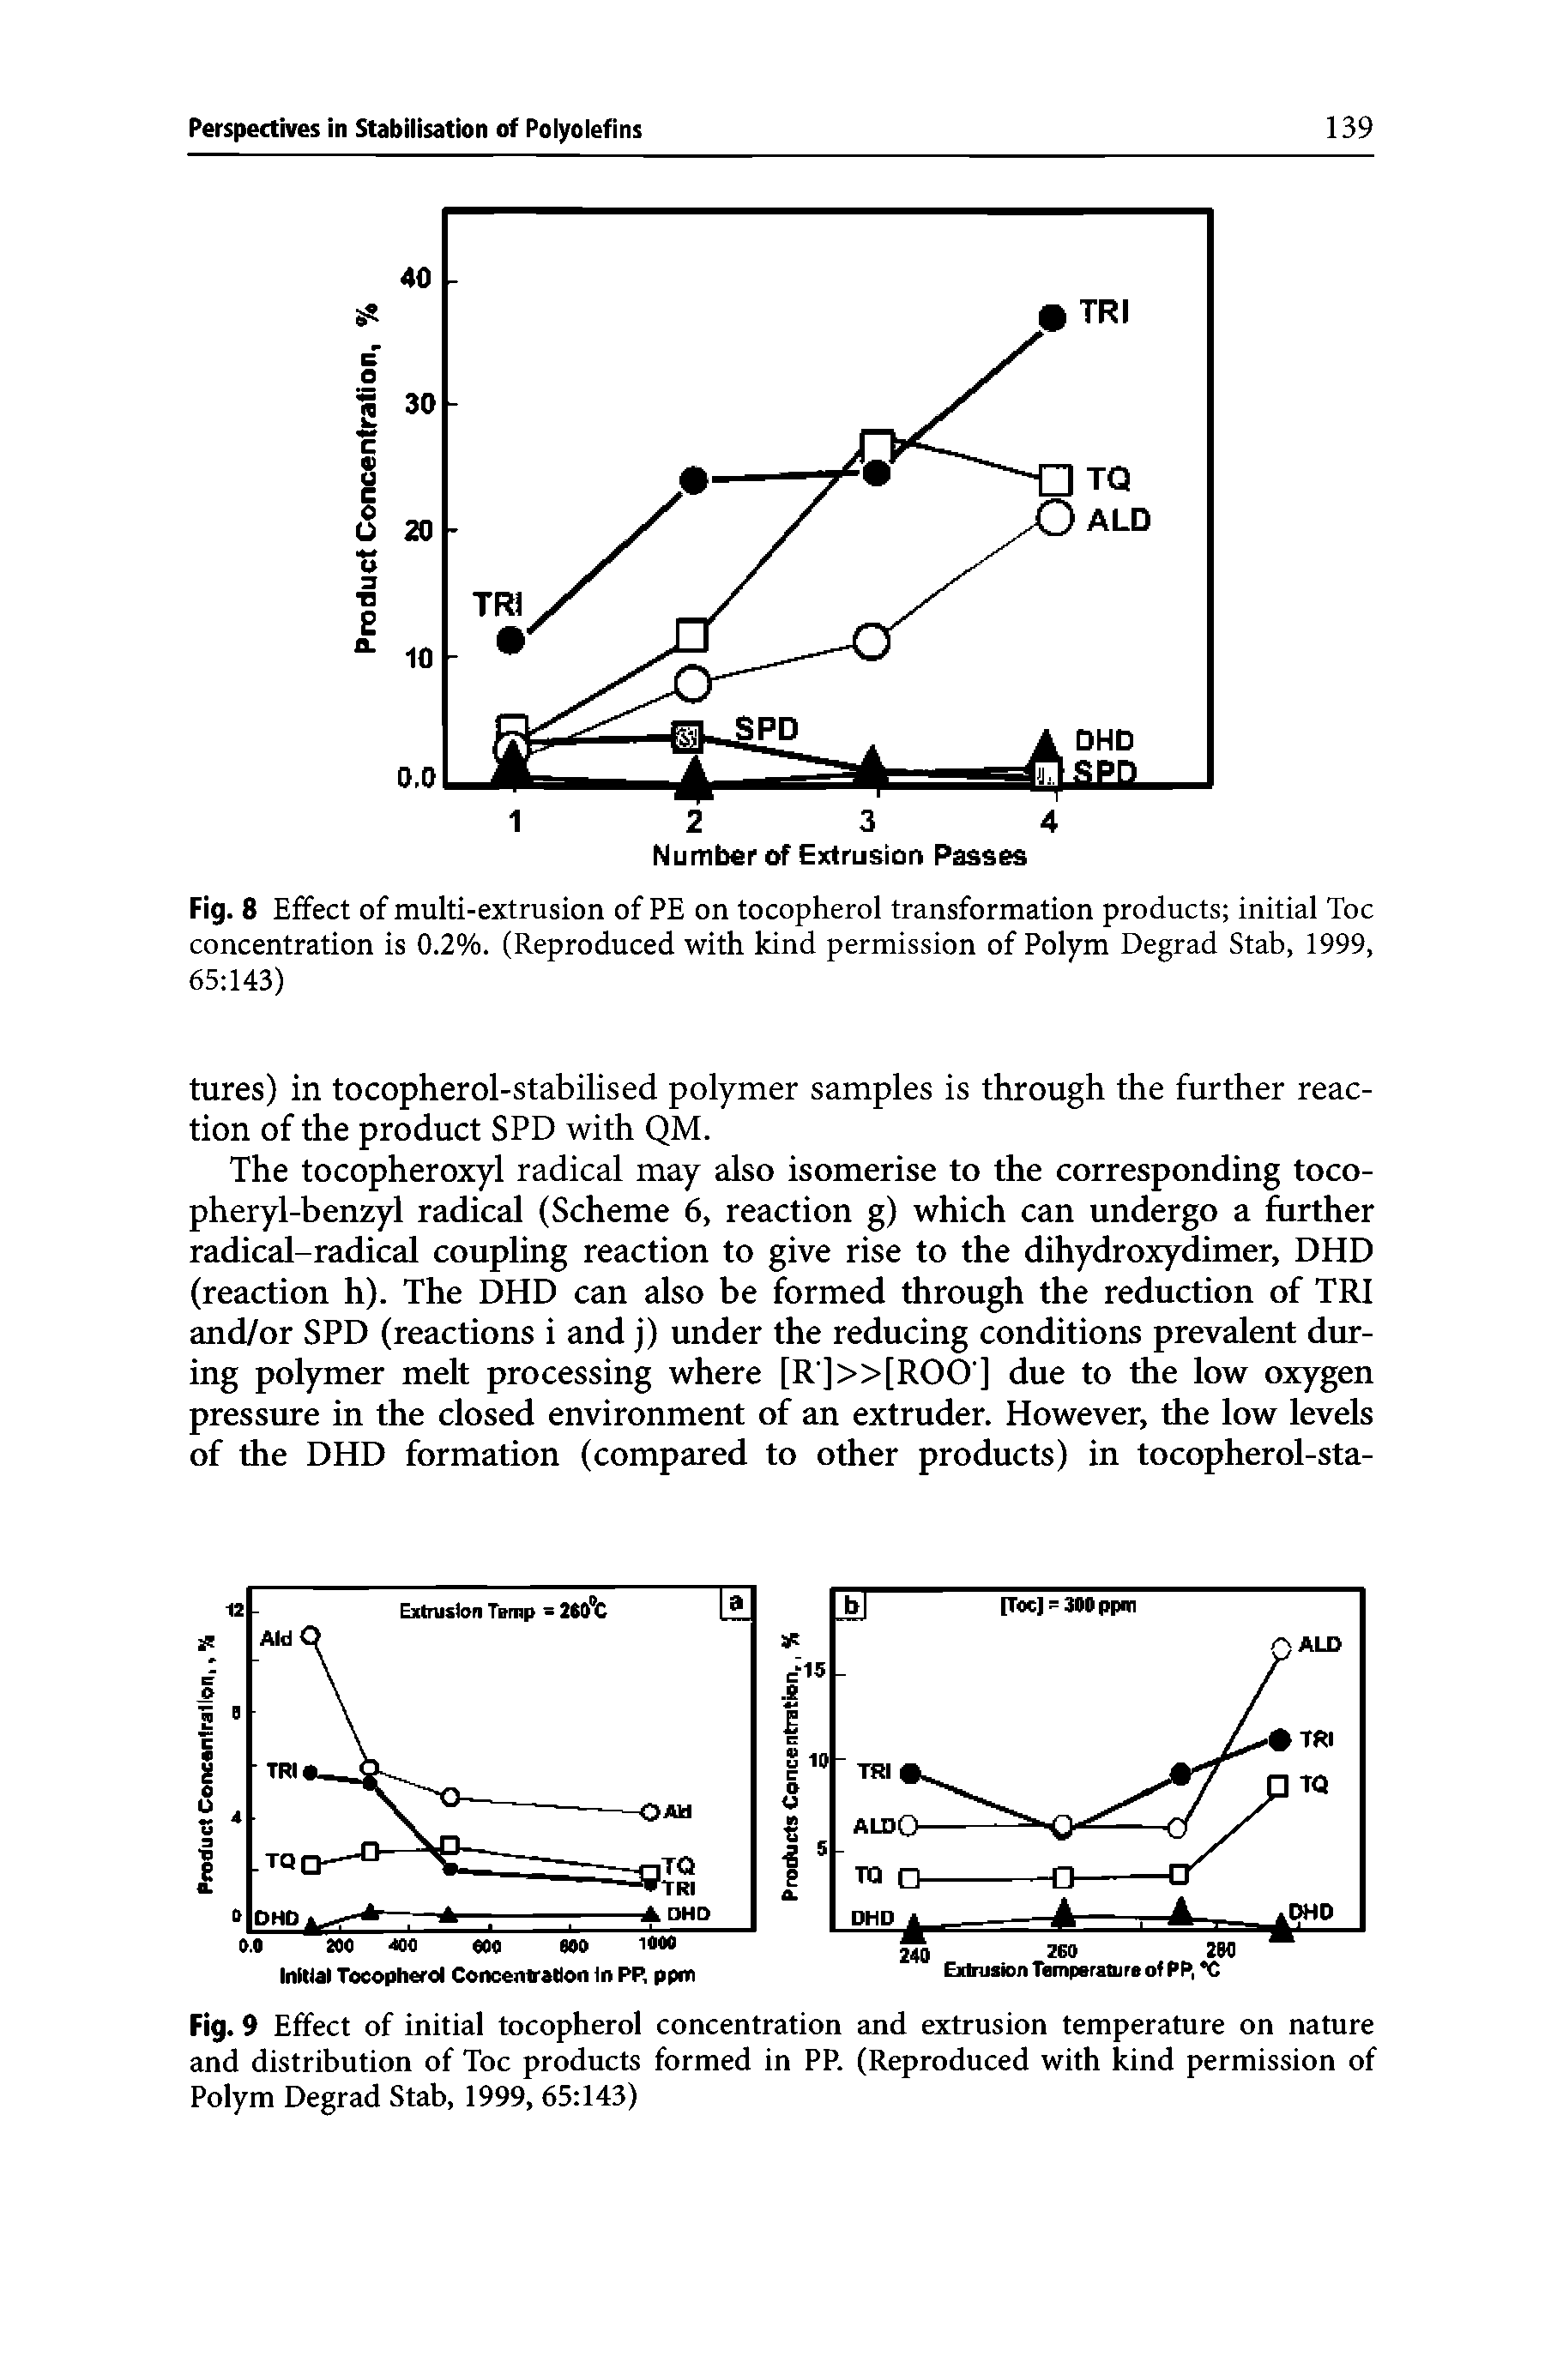 Fig.9 Effect of initial tocopherol concentration and extrusion temperature on nature and distribution of Toe products formed in PP. (Reproduced with kind permission of Polym Degrad Stab, 1999, 65 143)...